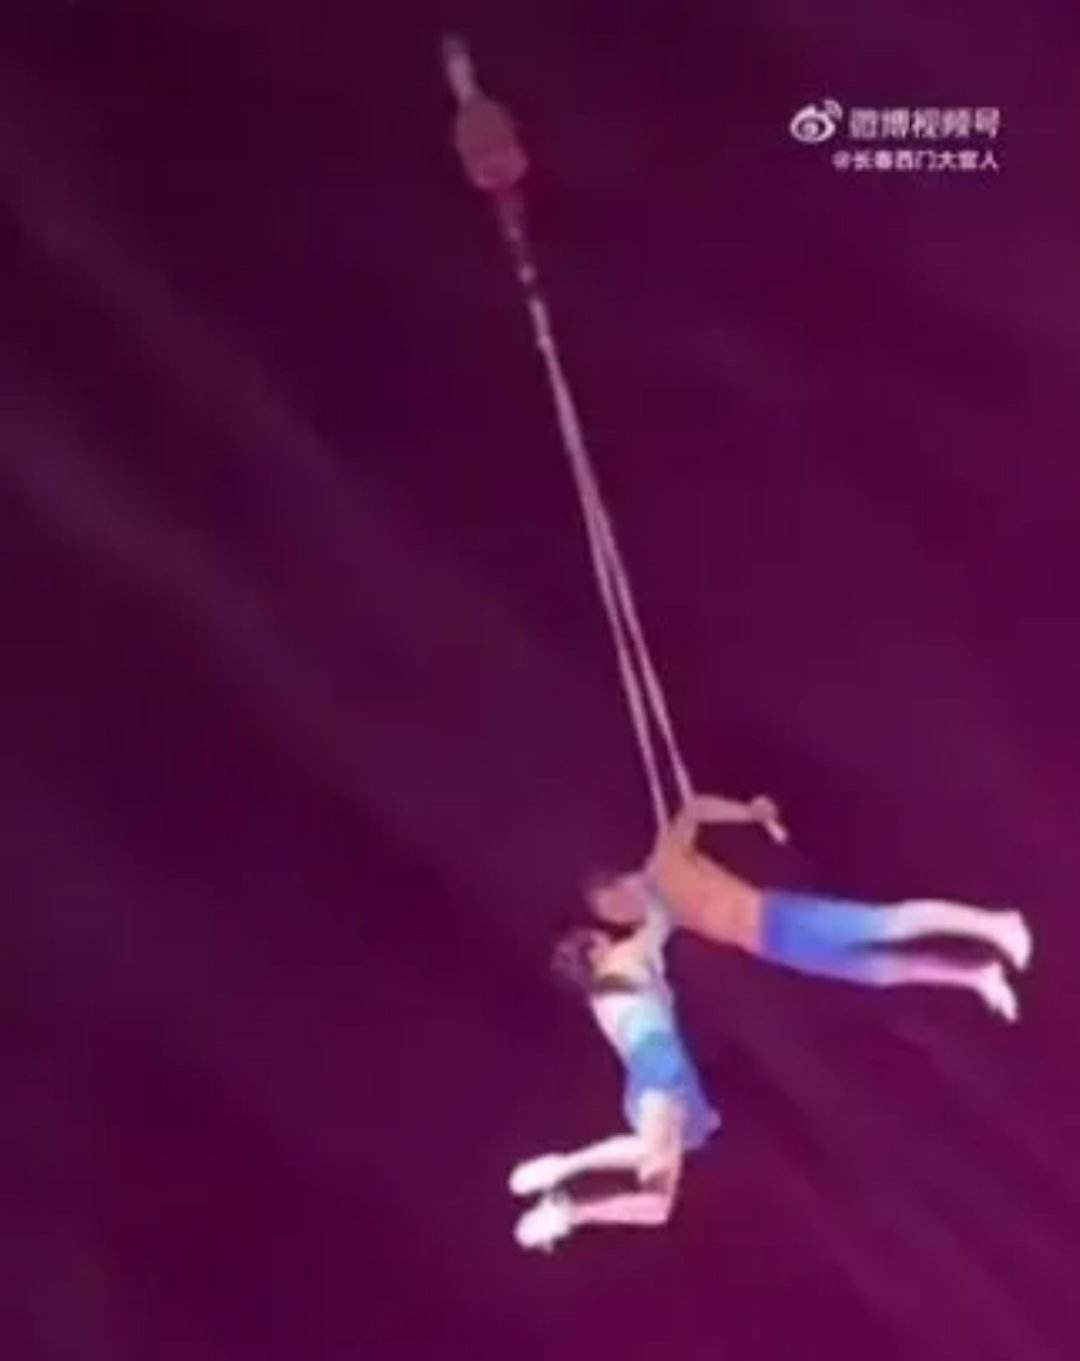 Chinese Acrobat Falls To Her Death After A Failed Dangerous Stunt